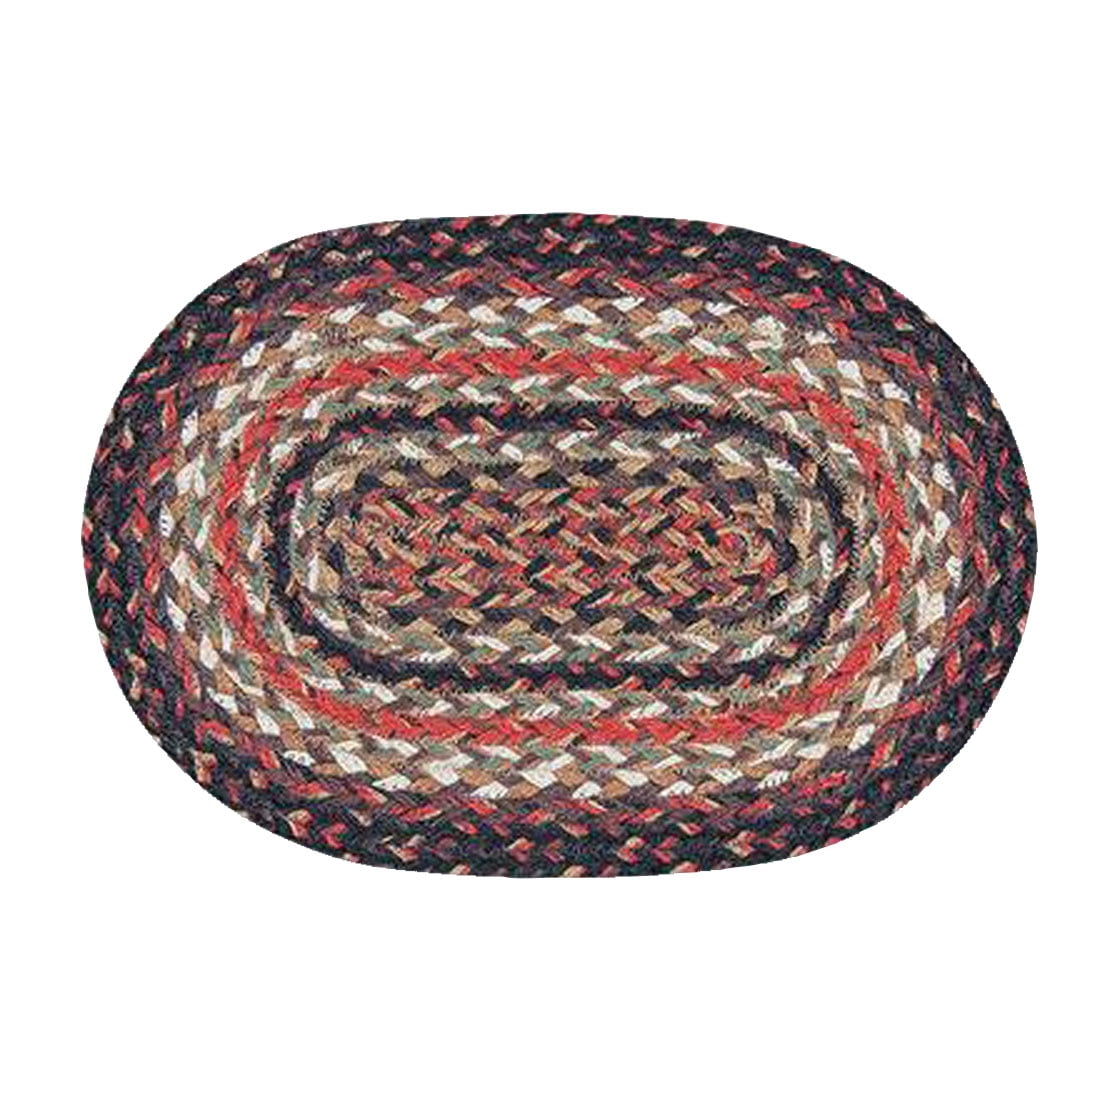 Capitol Importing 01-990 Terracotta Miniature Swatch Oval Rug, 7.5 X 11 In.